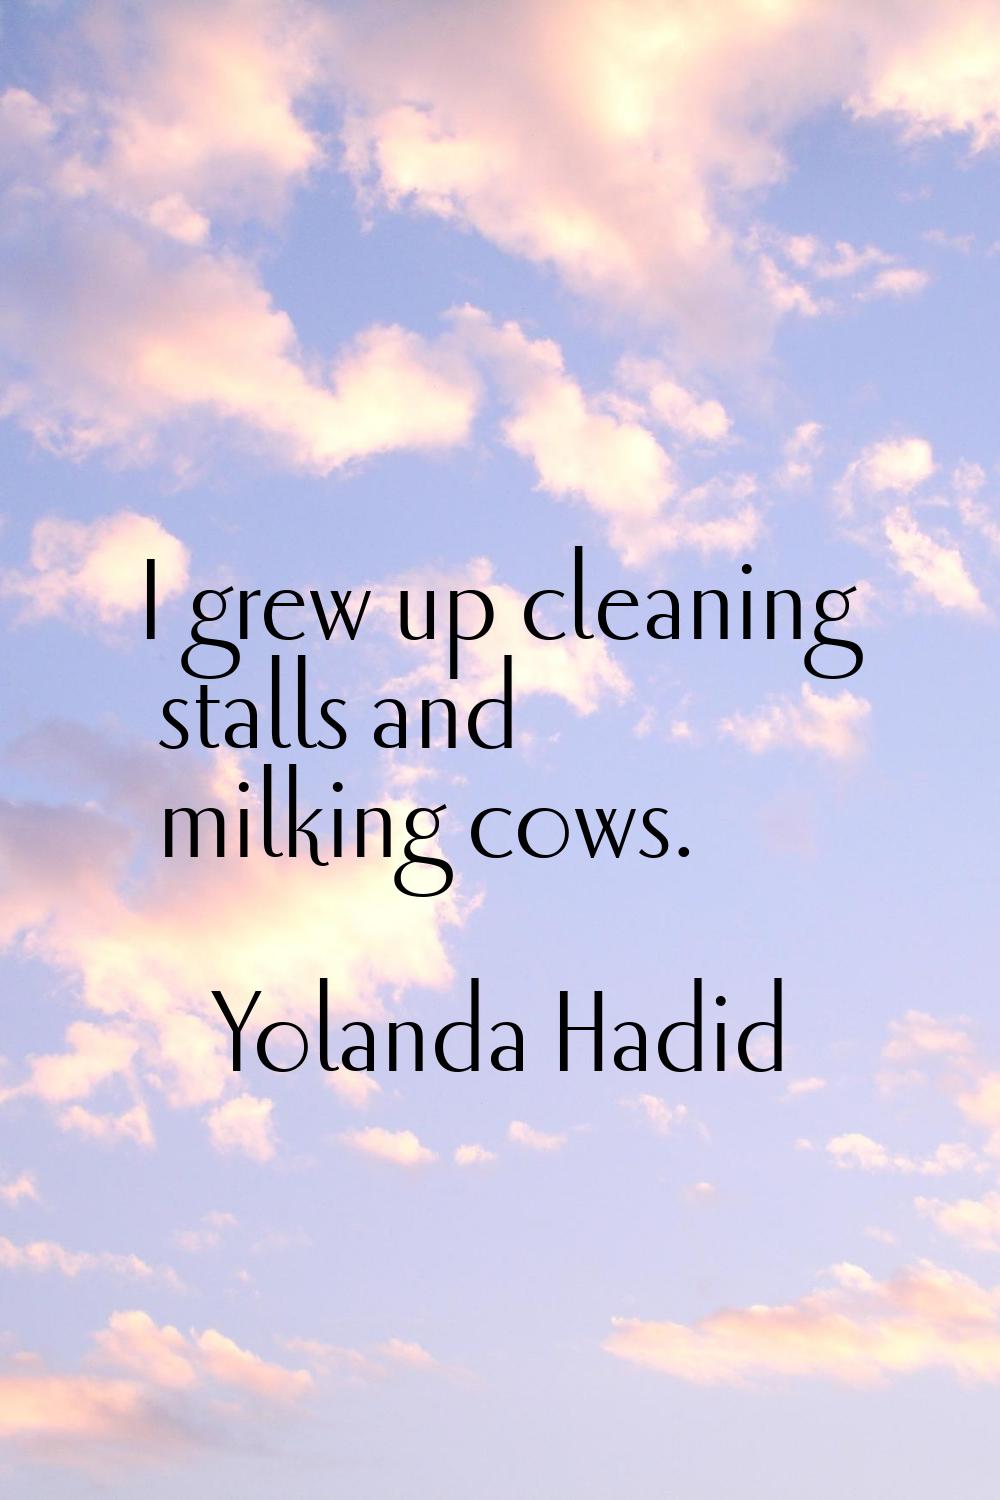 I grew up cleaning stalls and milking cows.